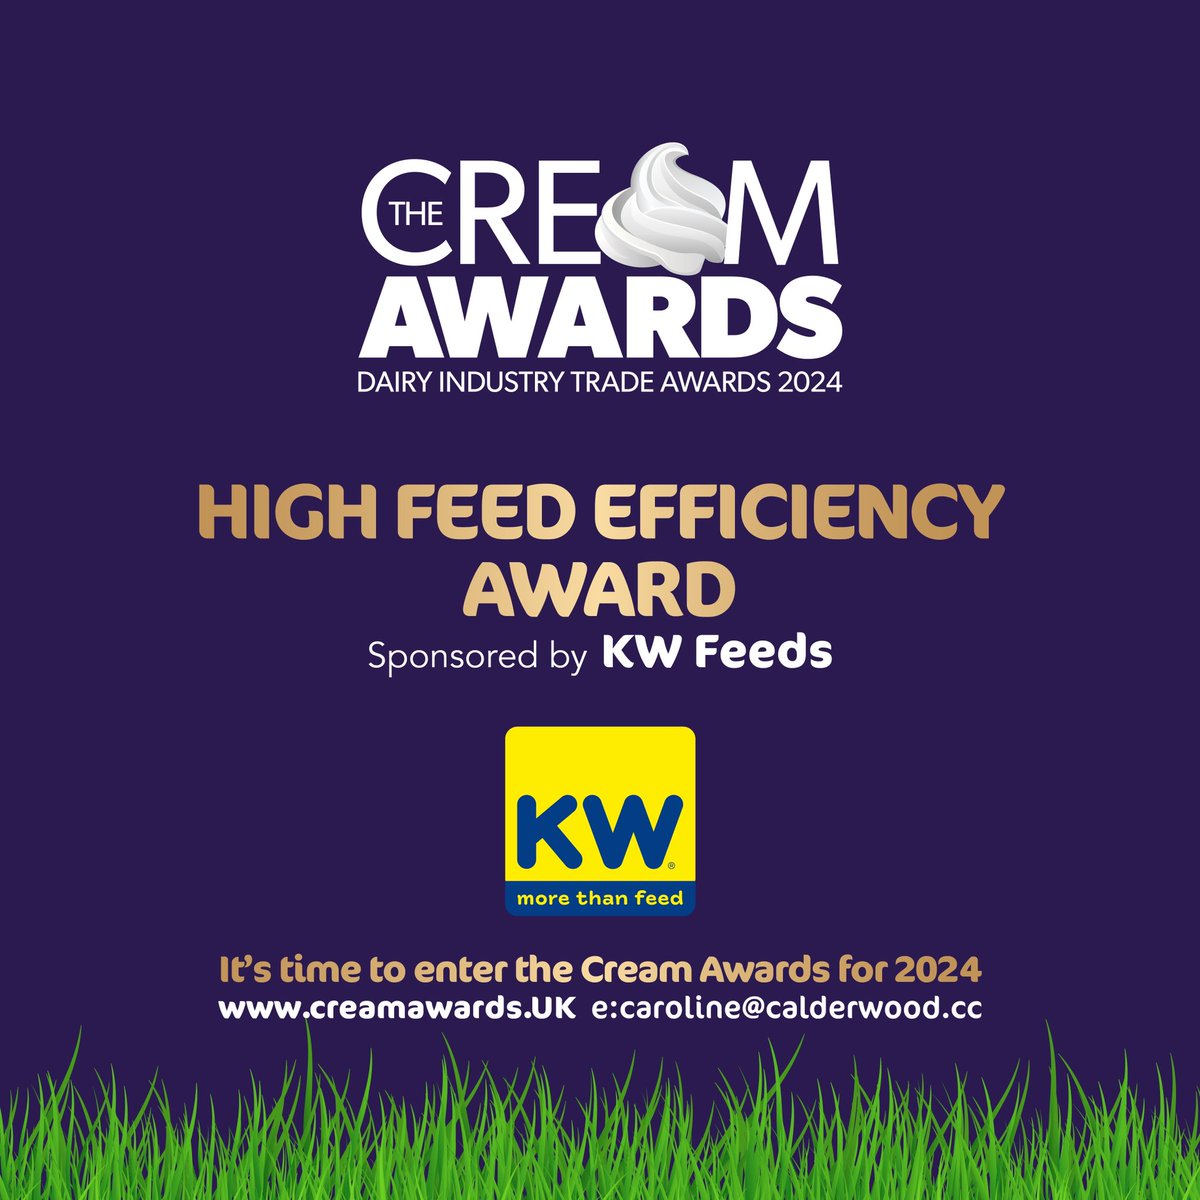 Cream Awards 2024 – open for entry. Start thinking about your entry, or nominate someone you know. See the entry form in the March British Dairying or go online now to creamawards.UK E.caroline@calderwood.cc, 01892 231604. #creamawards #teamdairy